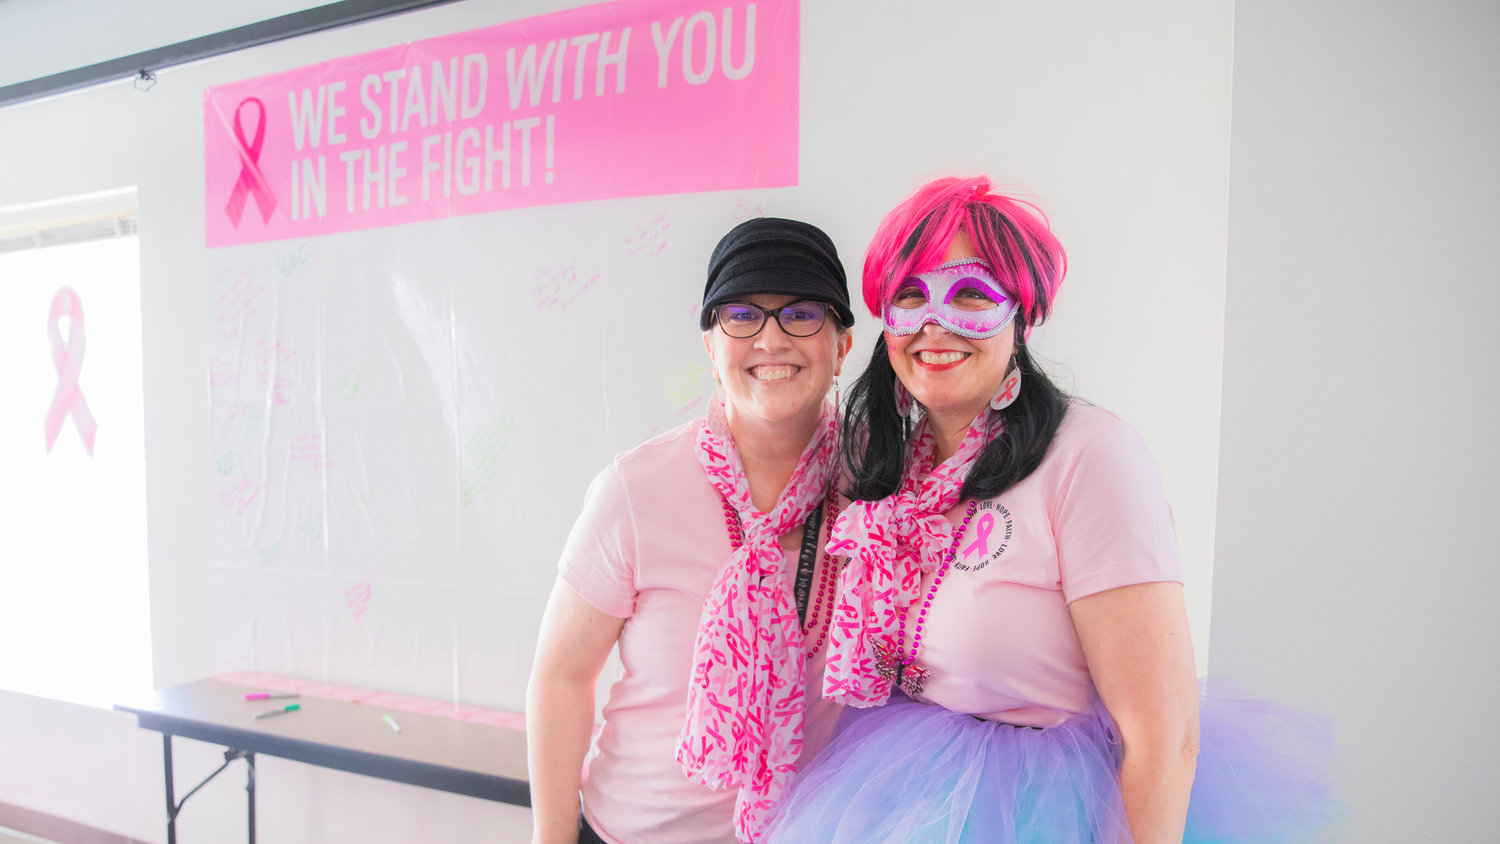 Lori Pulver, left, smiles for a photo with attendees decked out in pink hues for Breast Cancer Awareness Month Friday morning in Chehalis.